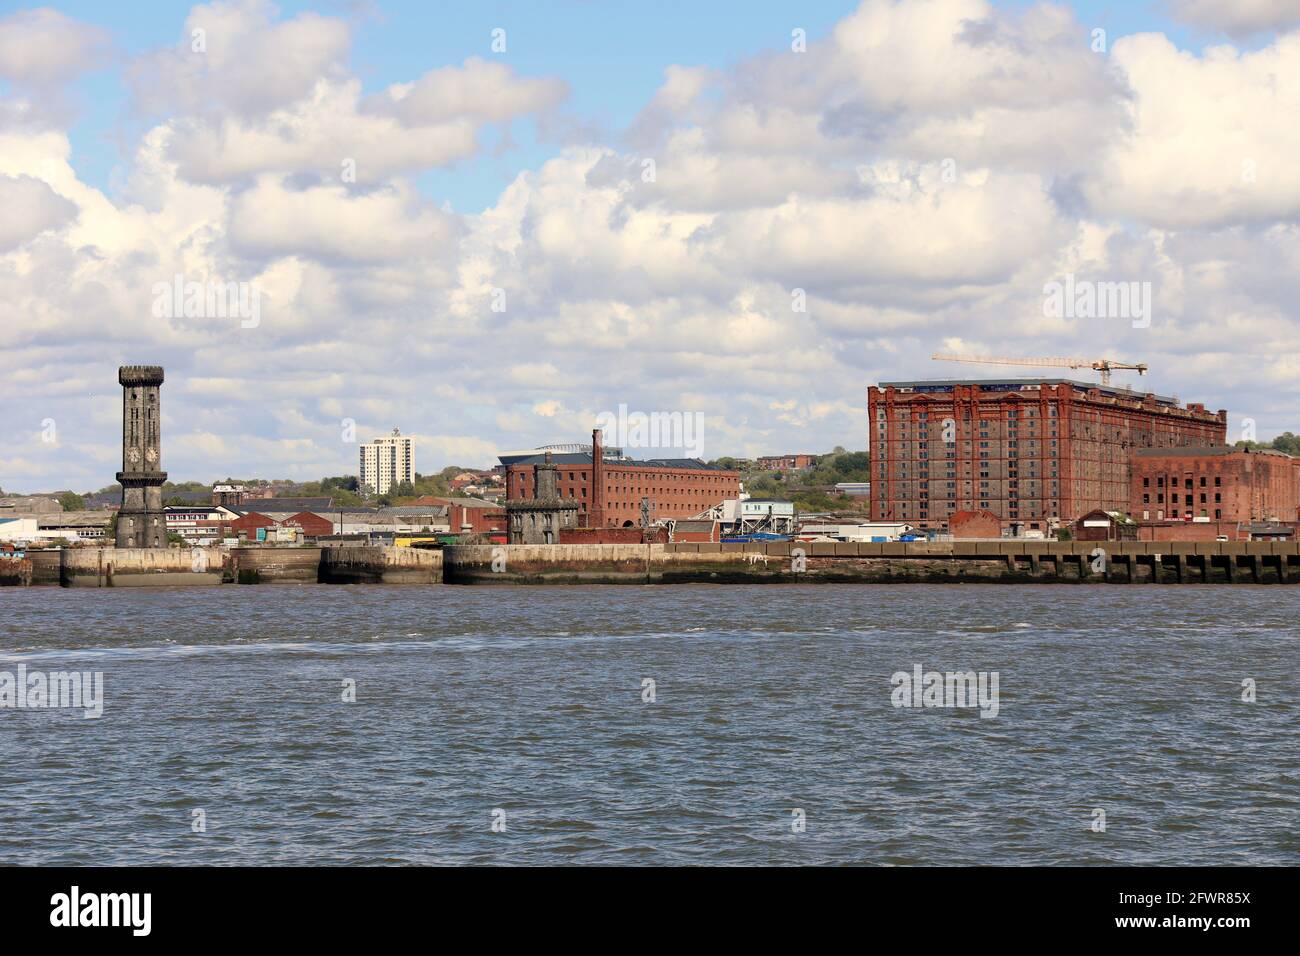 Liverpool Docklands from the River Mersey Stock Photo